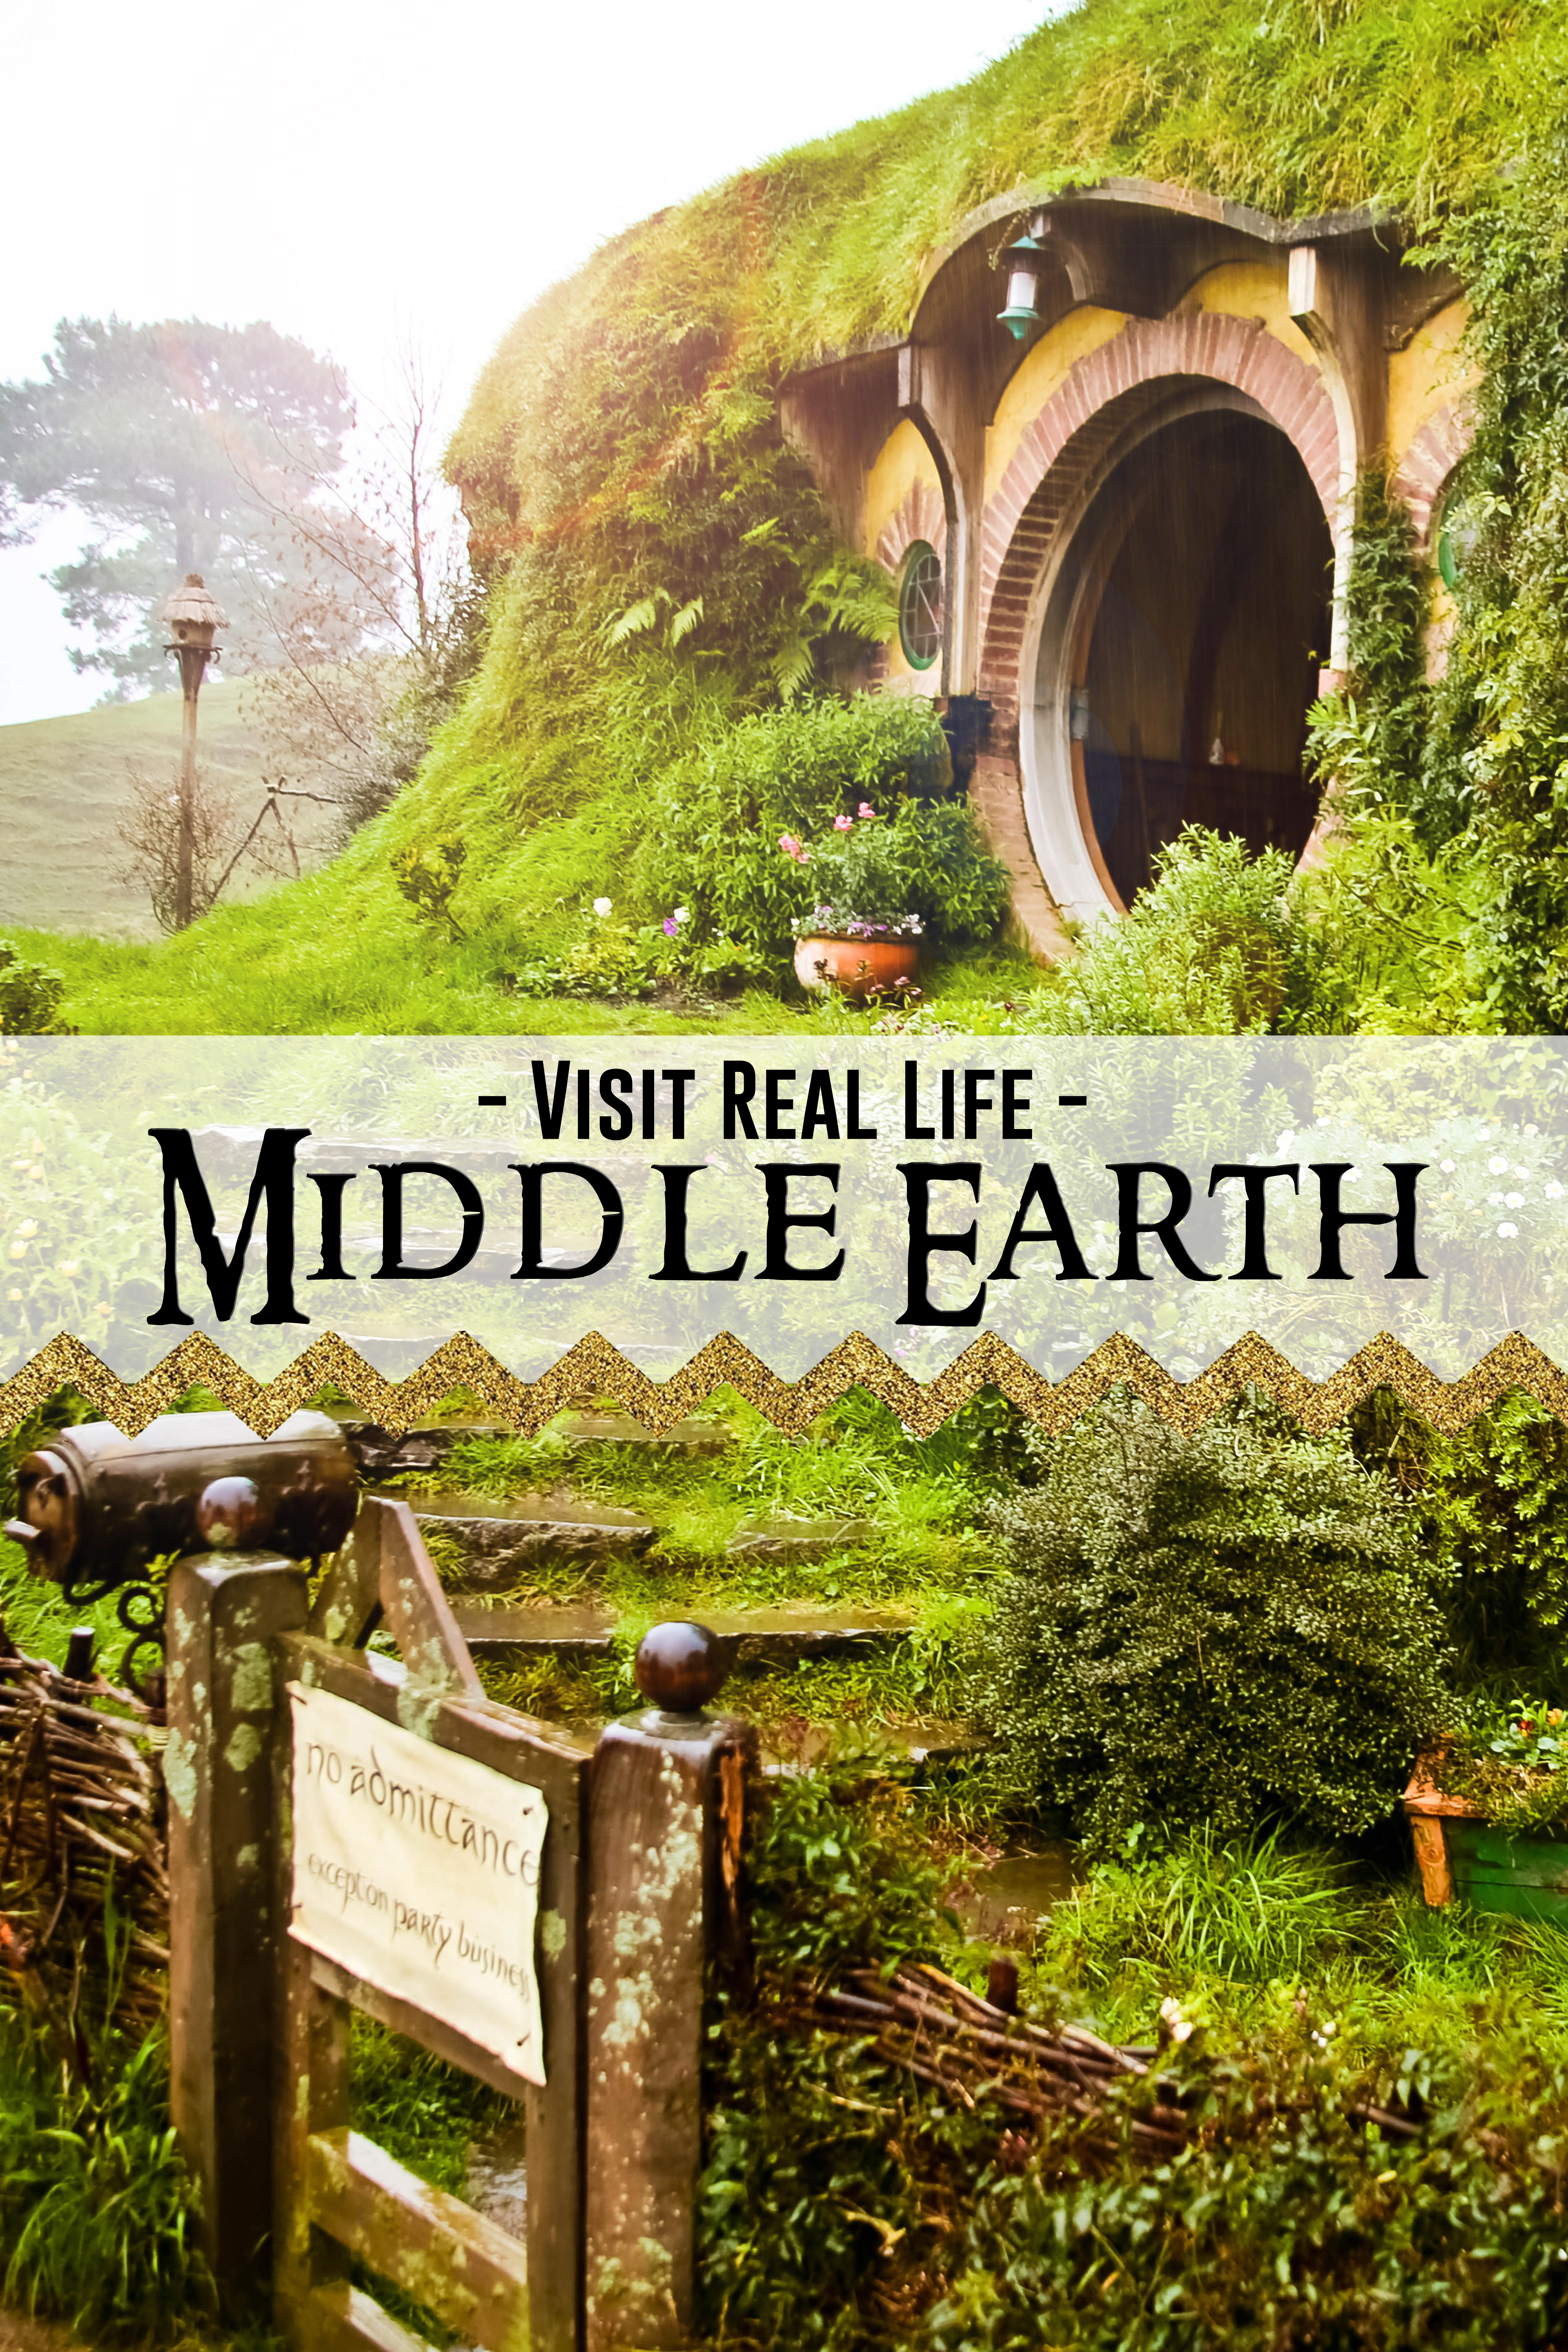 Visit REAL LIFE Middle Earth!